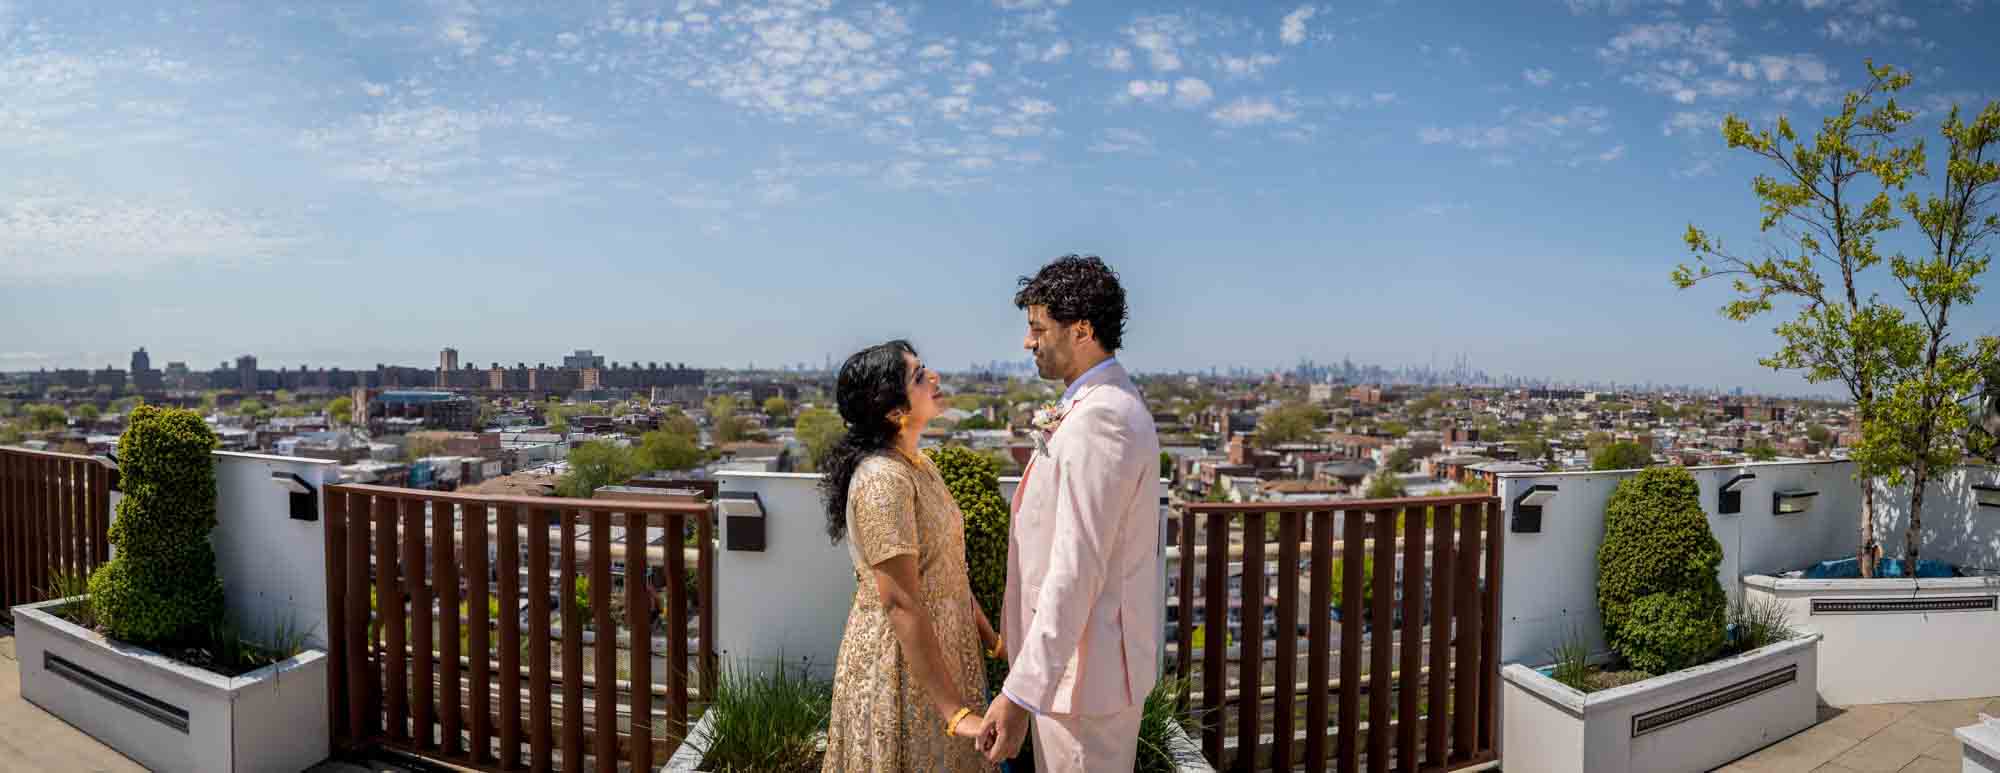 Panorama shot of Indian bride and groom holding hands on roof with view of Manhattan in background during a Terrace on the Park wedding